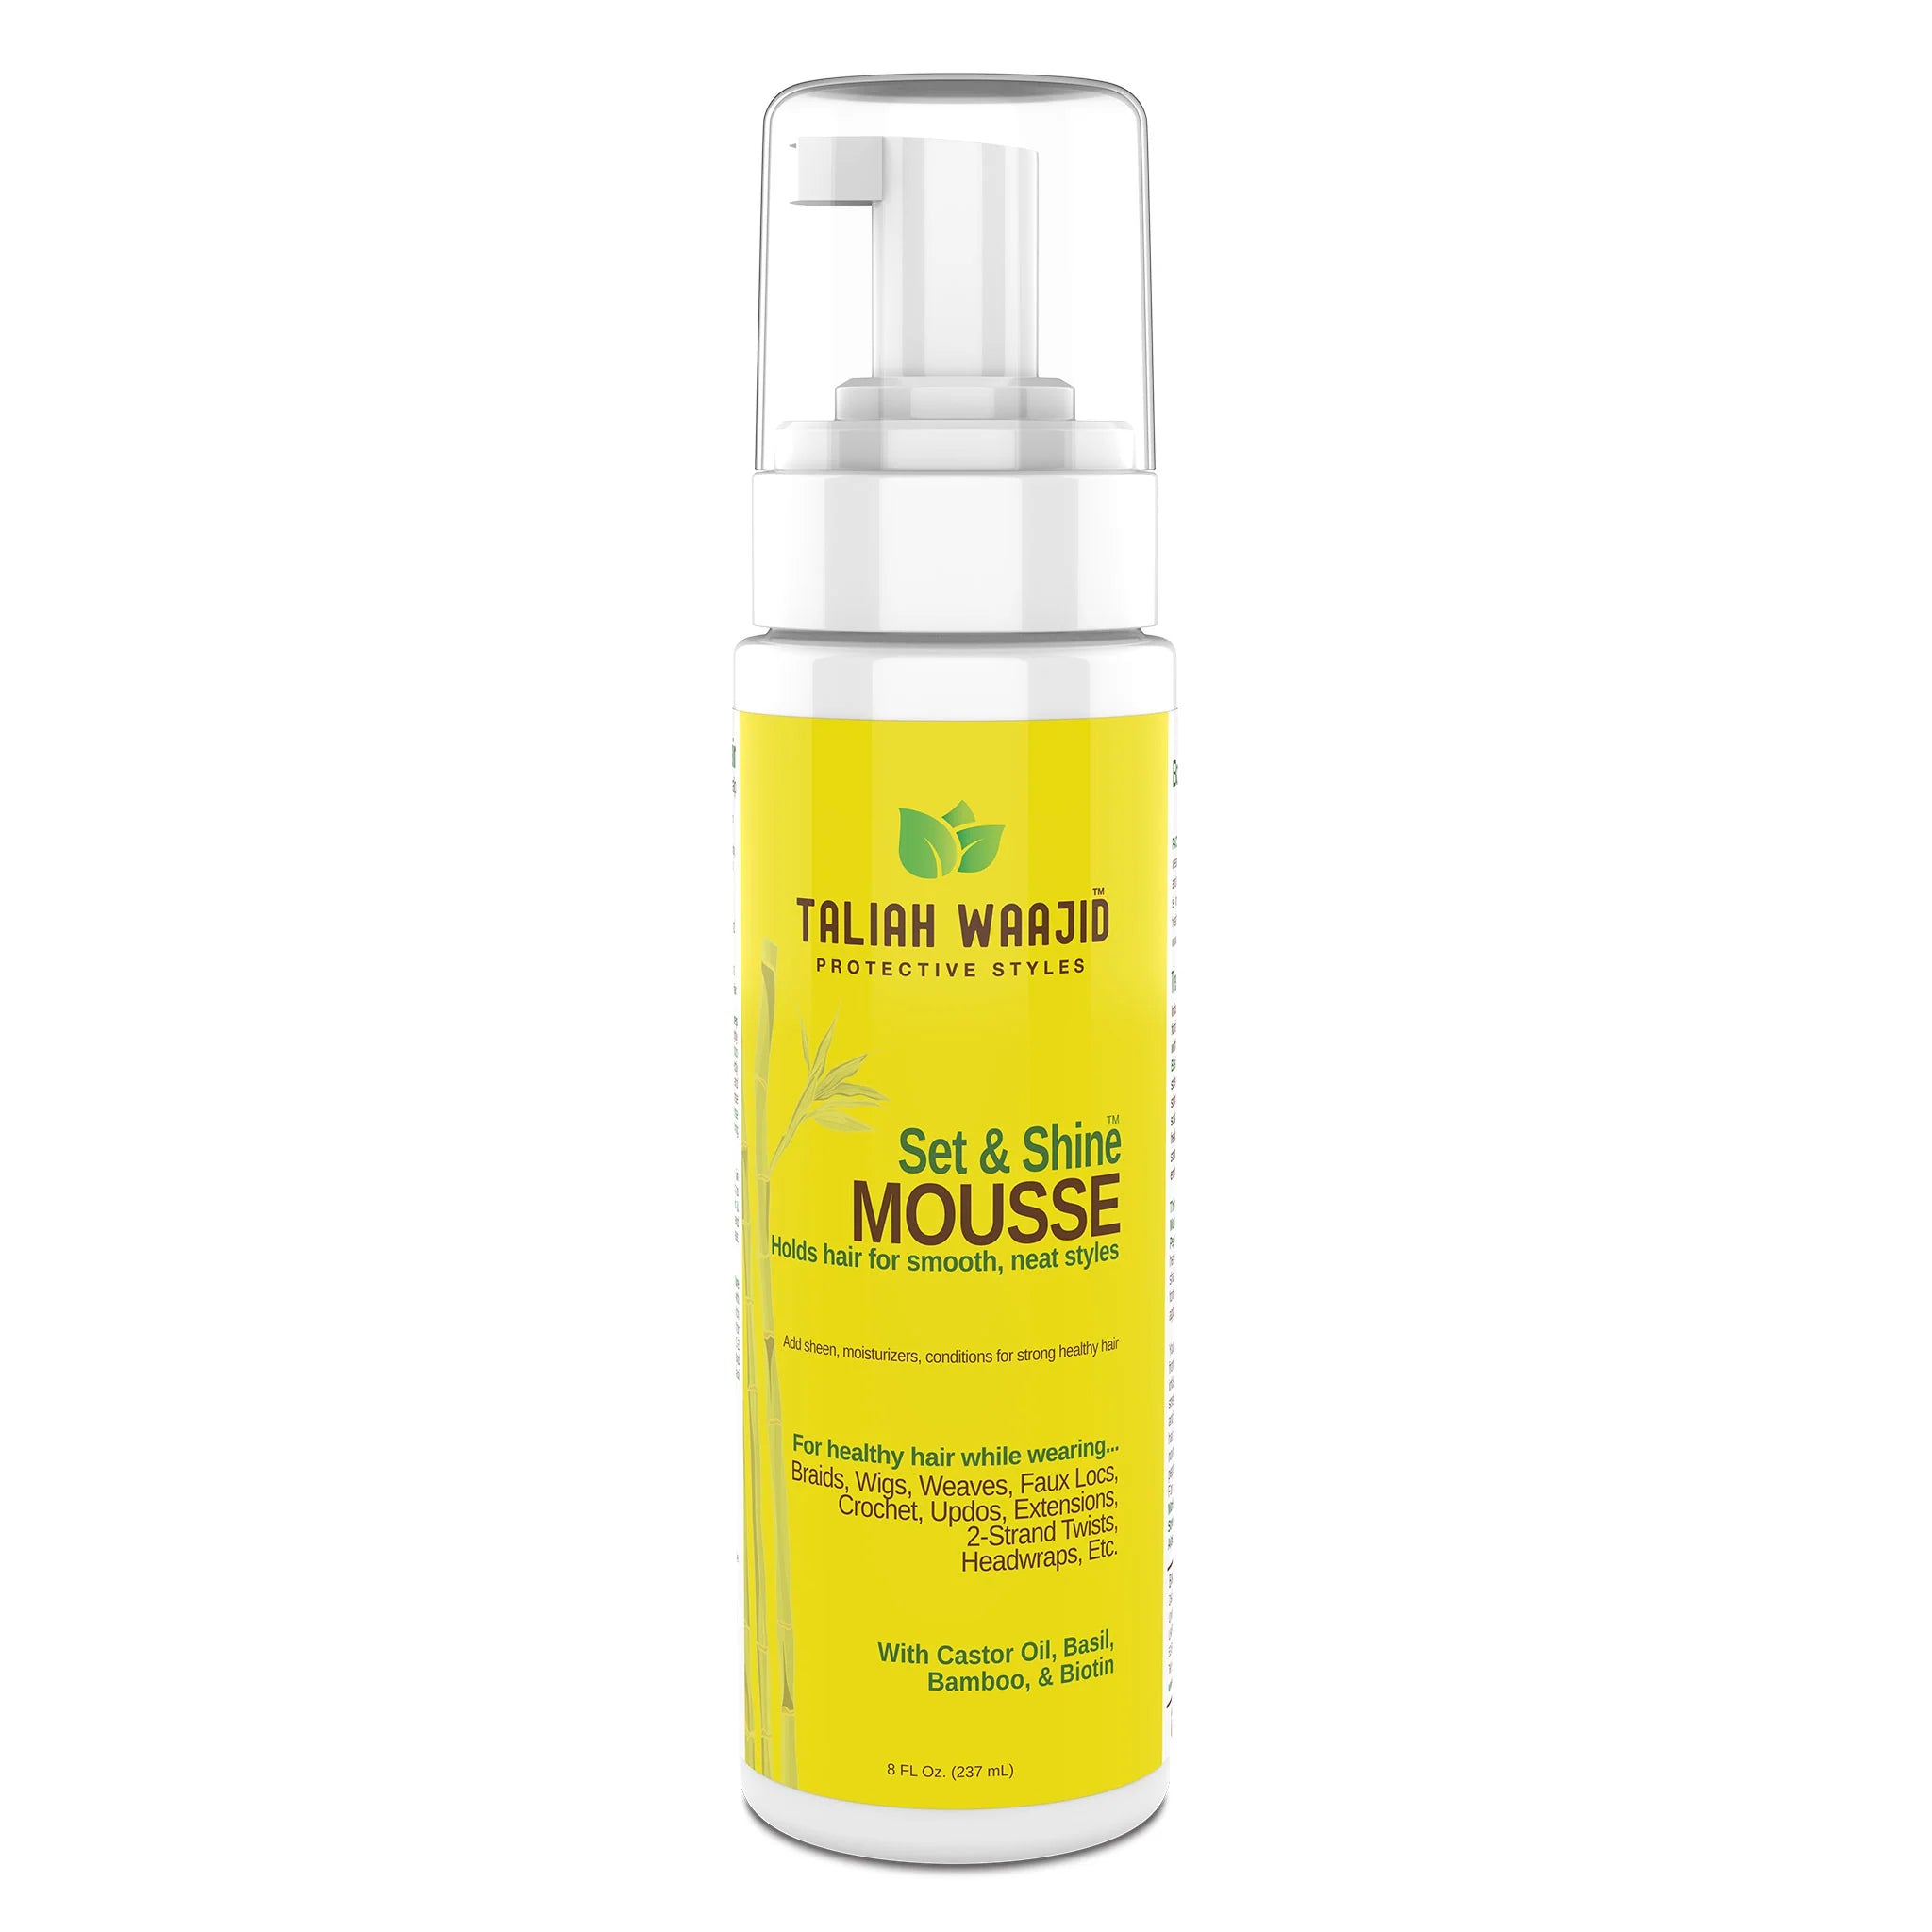 Taliah Waajid Protective Styles Set Sine Style Mousse 8oz